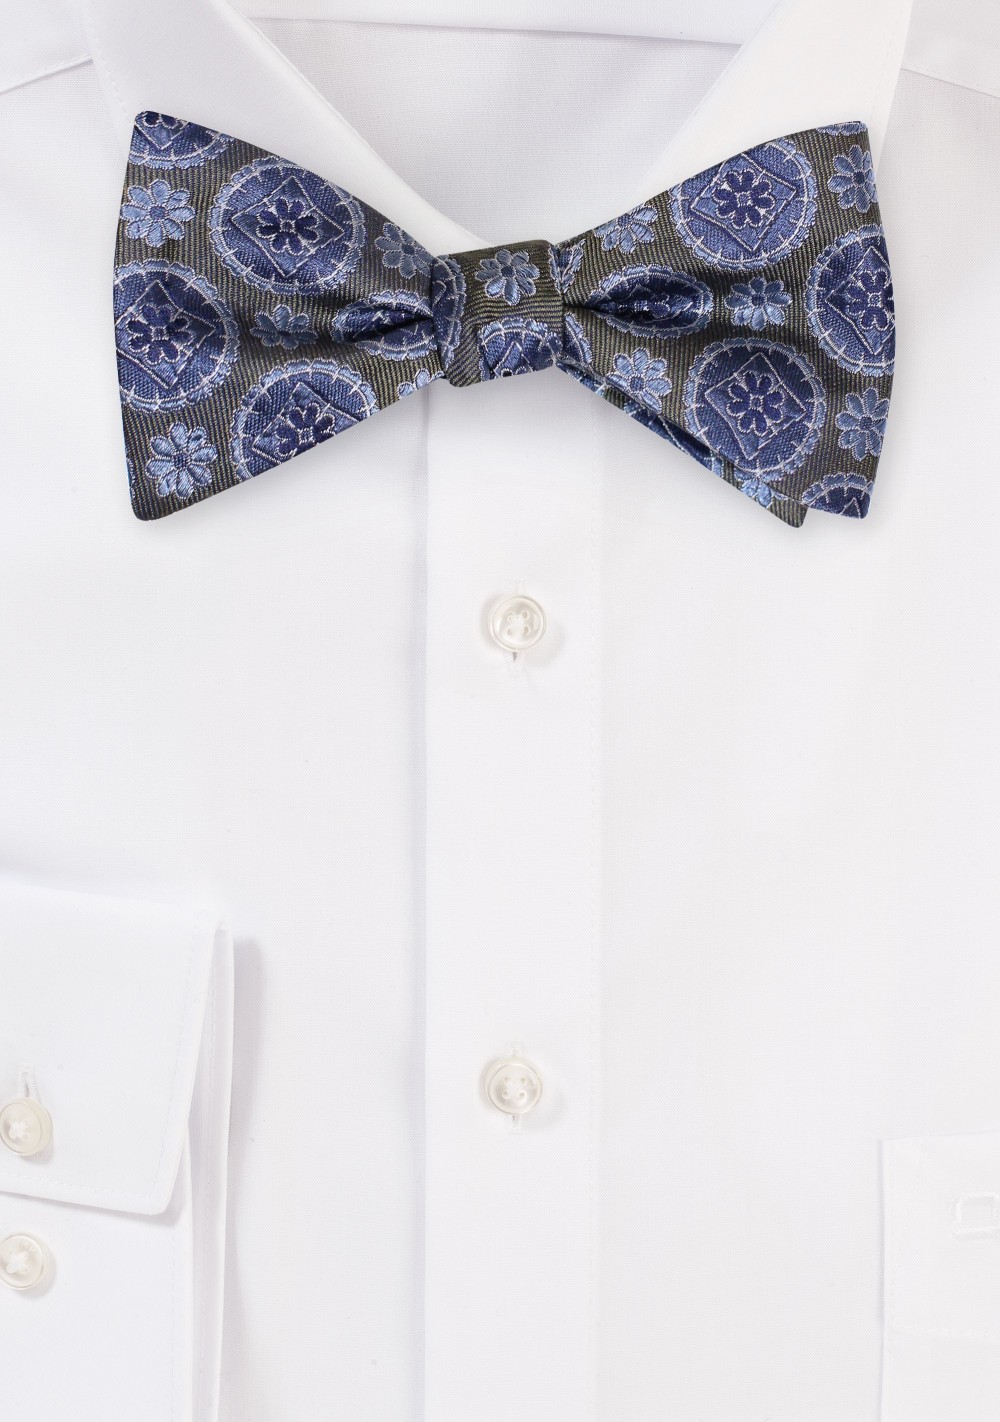 Olive Green Medallion Bow Tie in Self-Tie Style